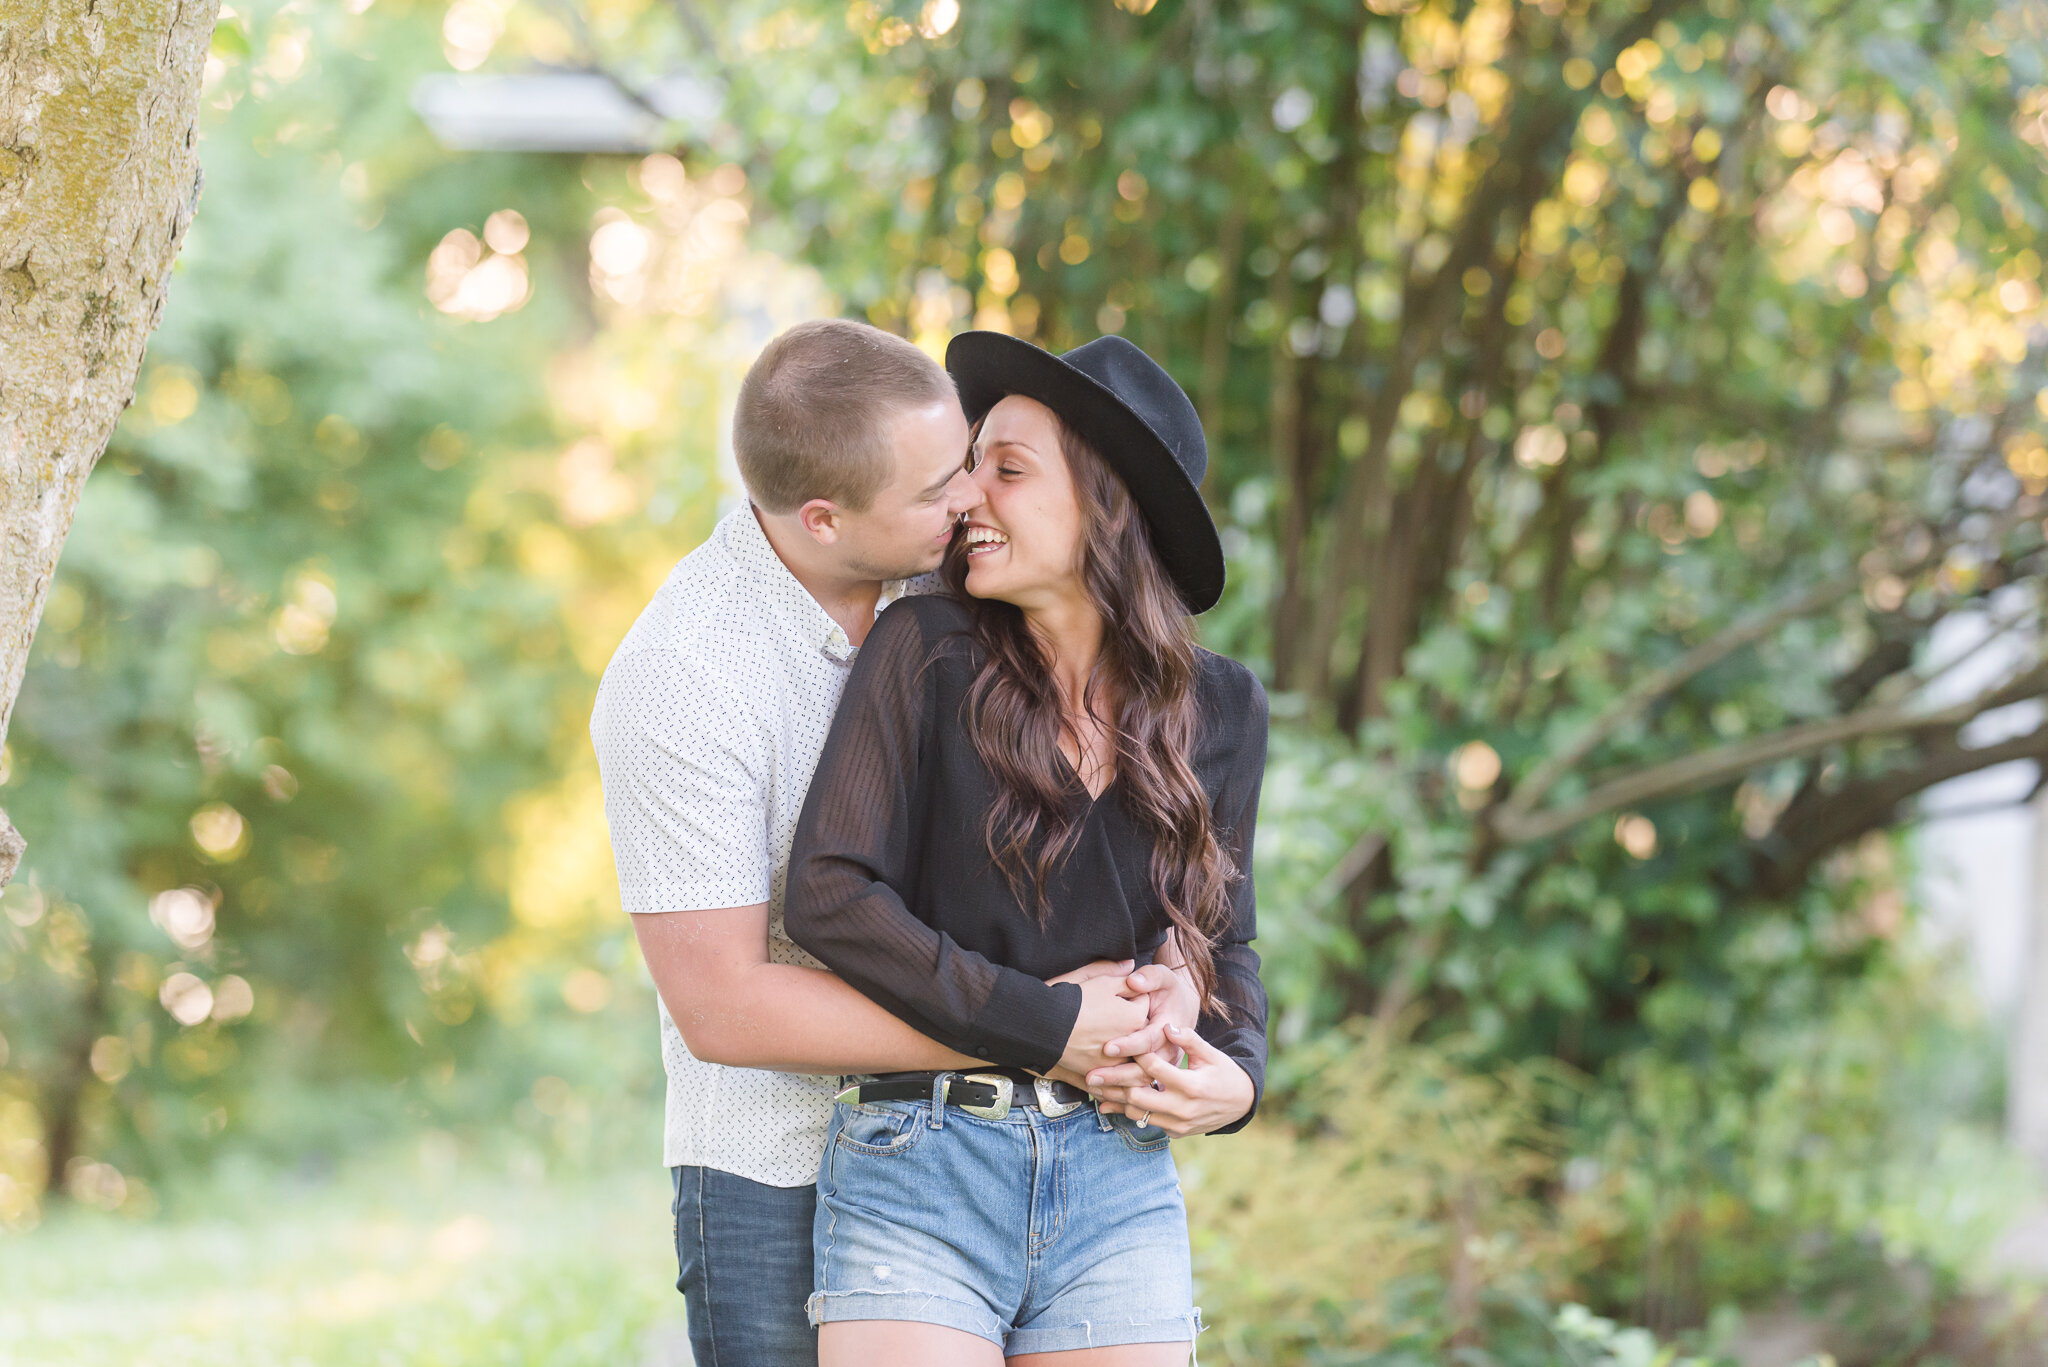 Eagle Creek Engagement Session with Puppy5274.jpg